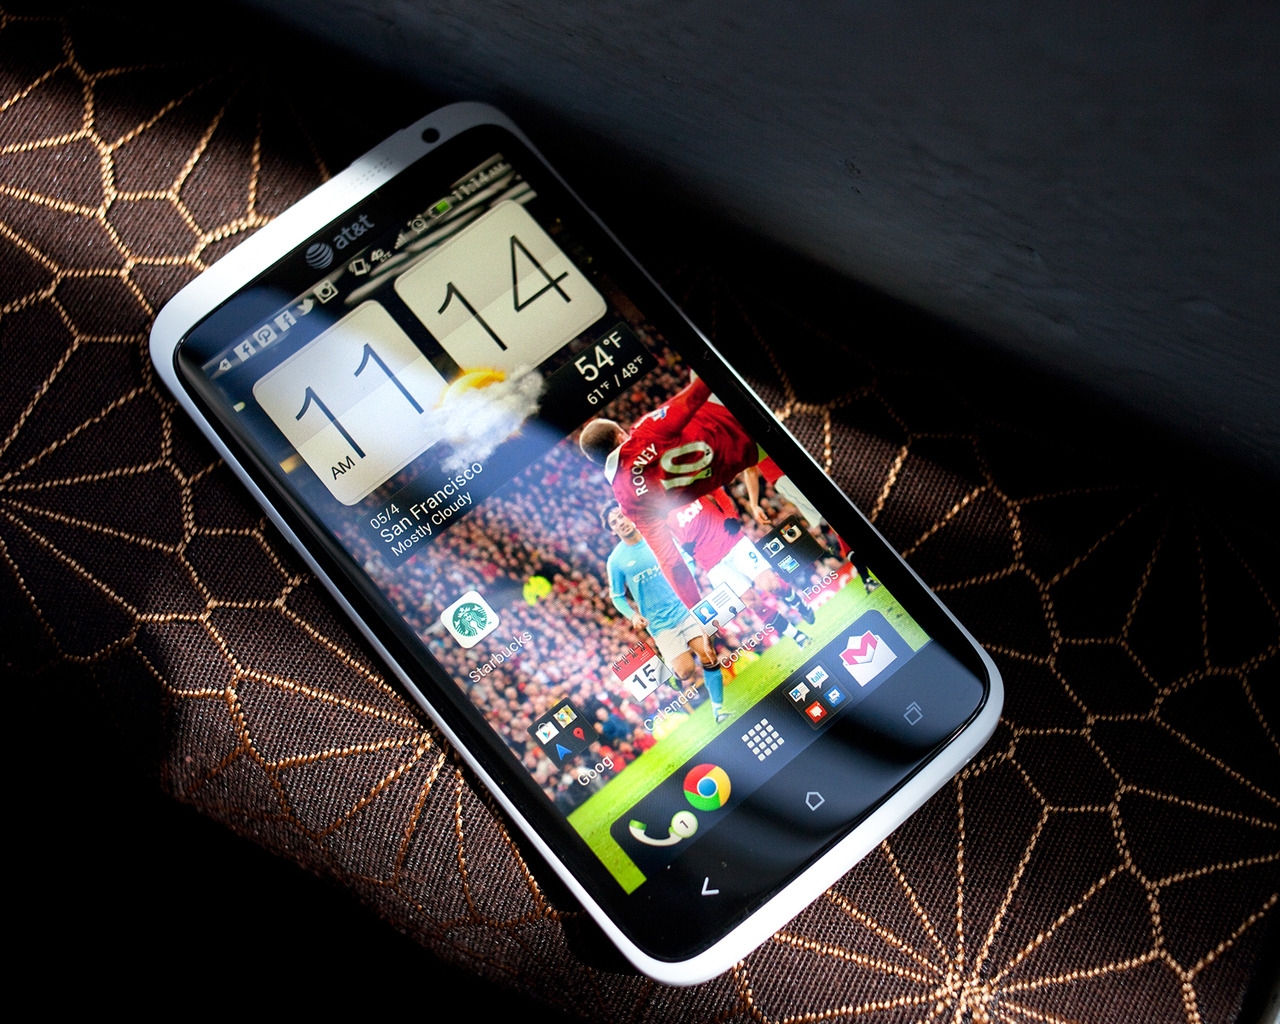 HTC One for 1280 x 1024 resolution